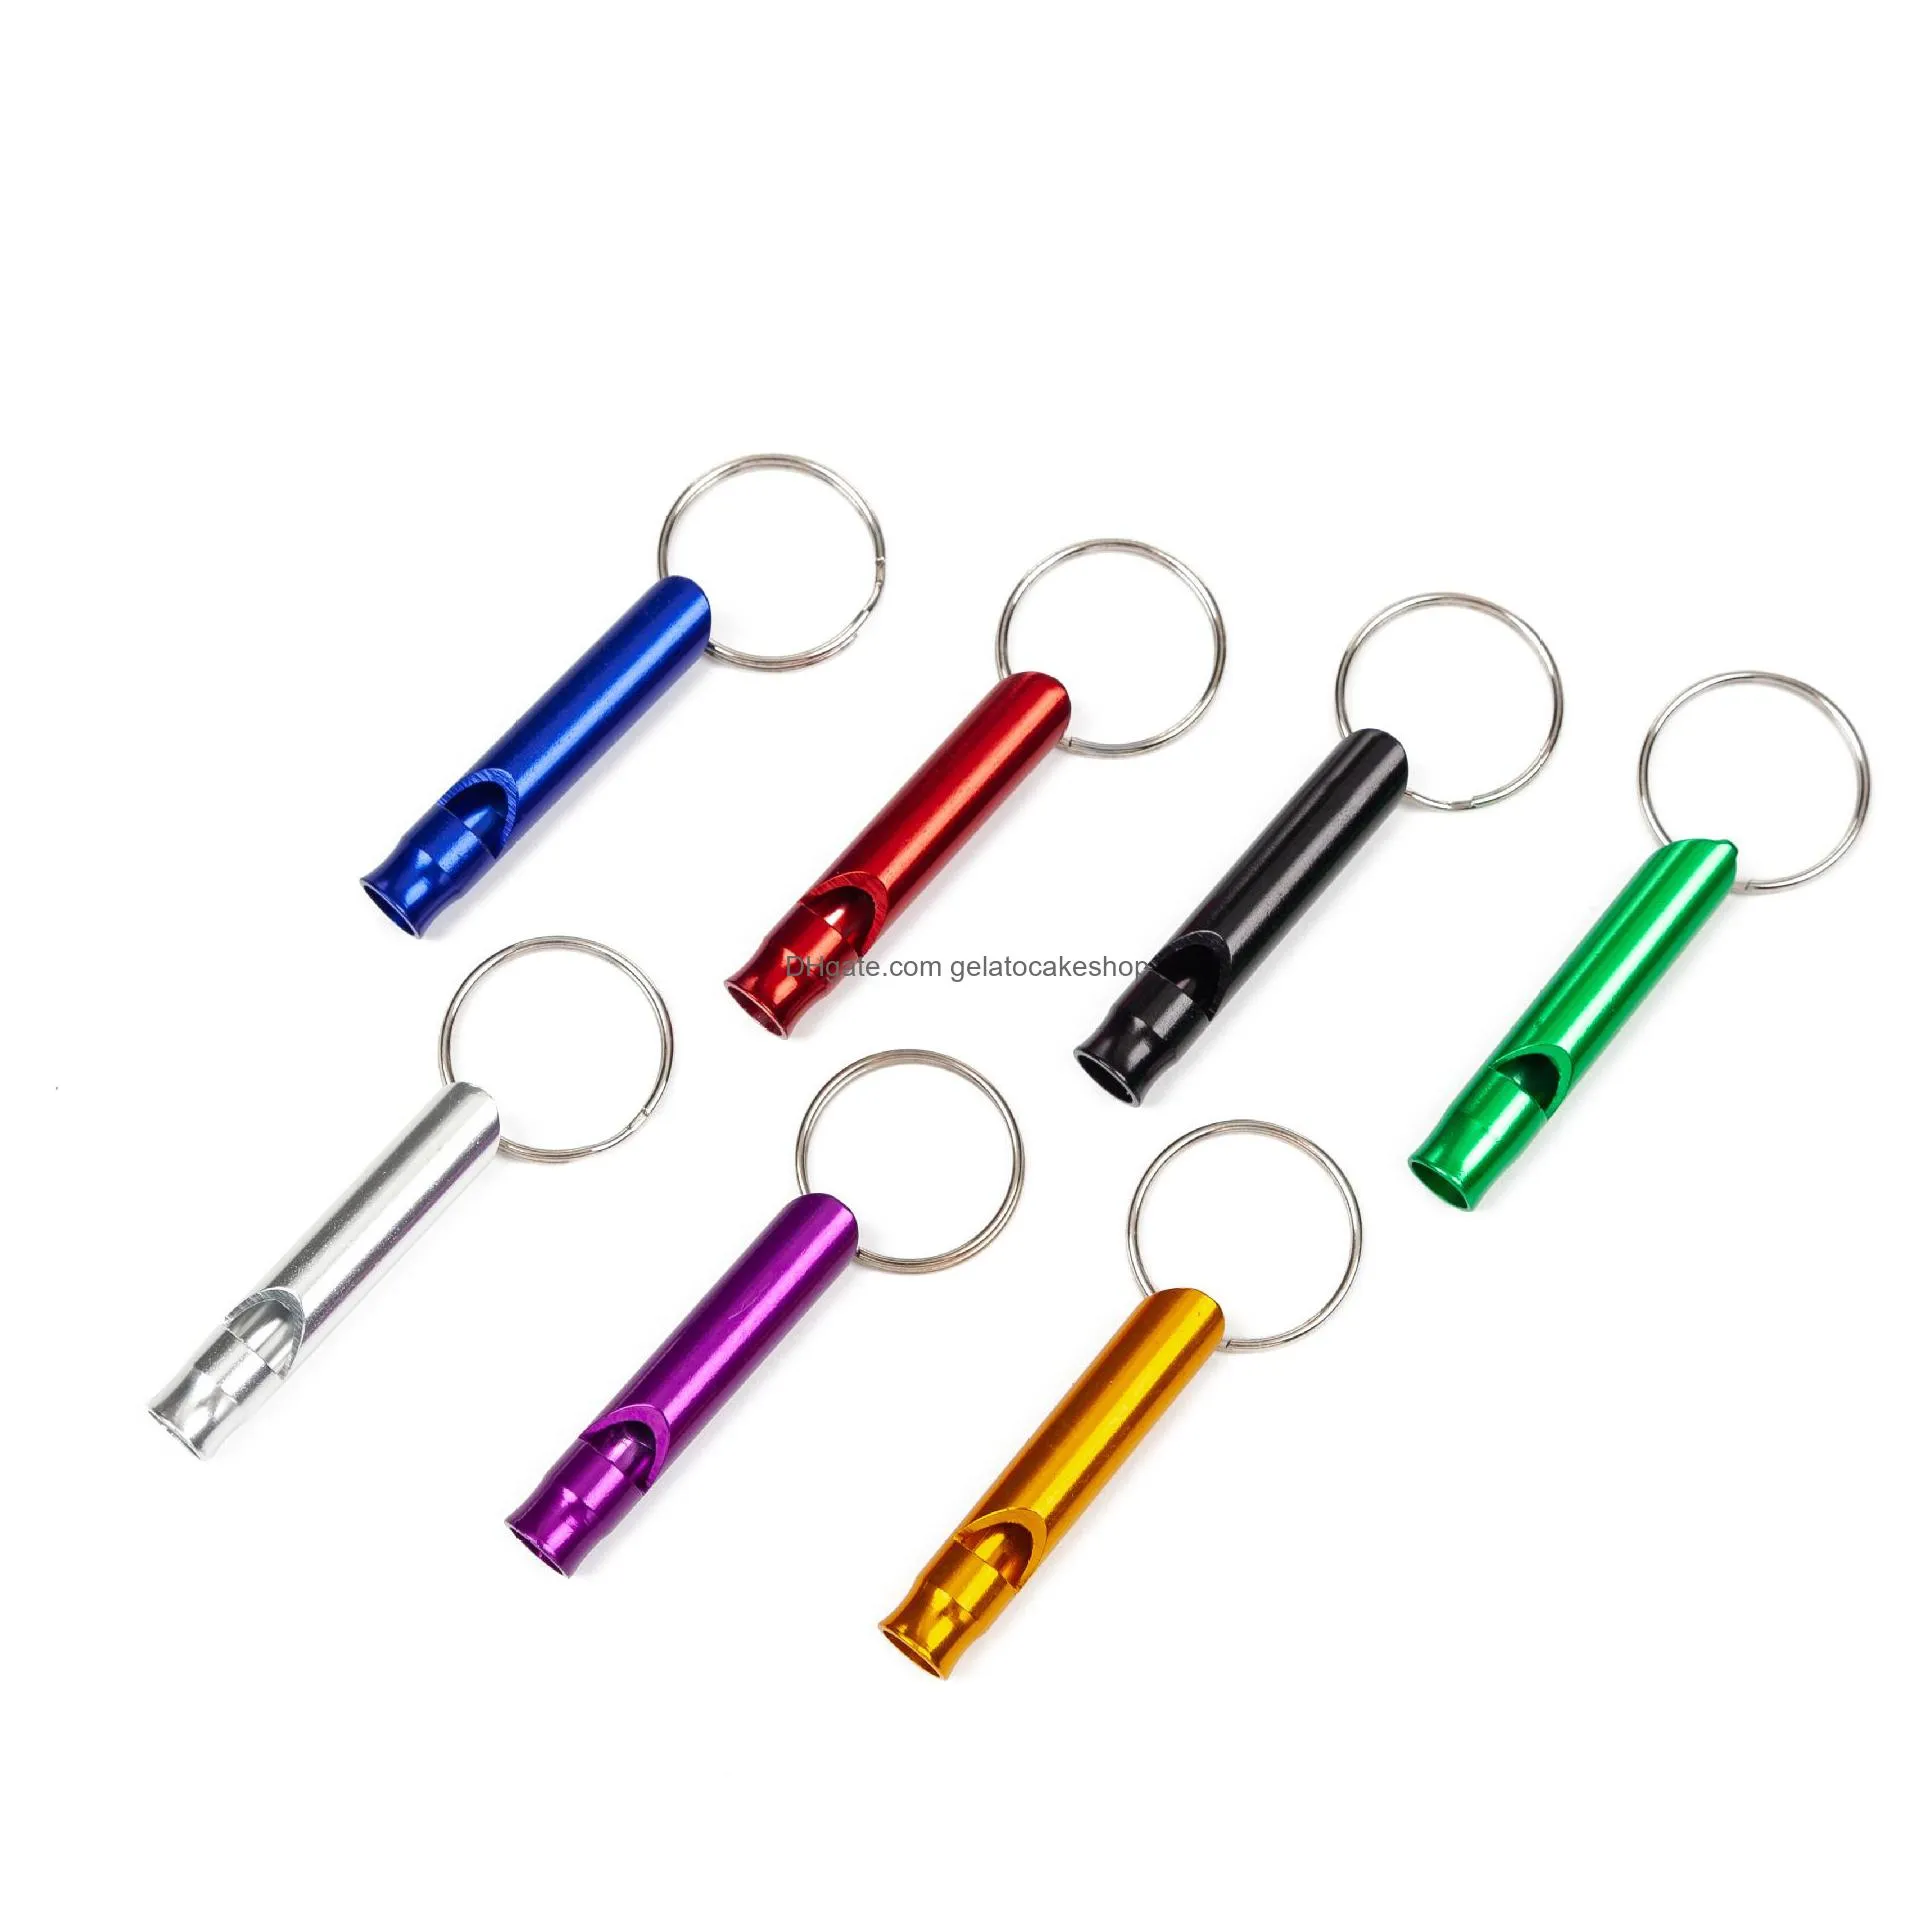 whistle outdoor metal multifunction pendant with keychain keyring for outdoor survival emergency mini size whistles